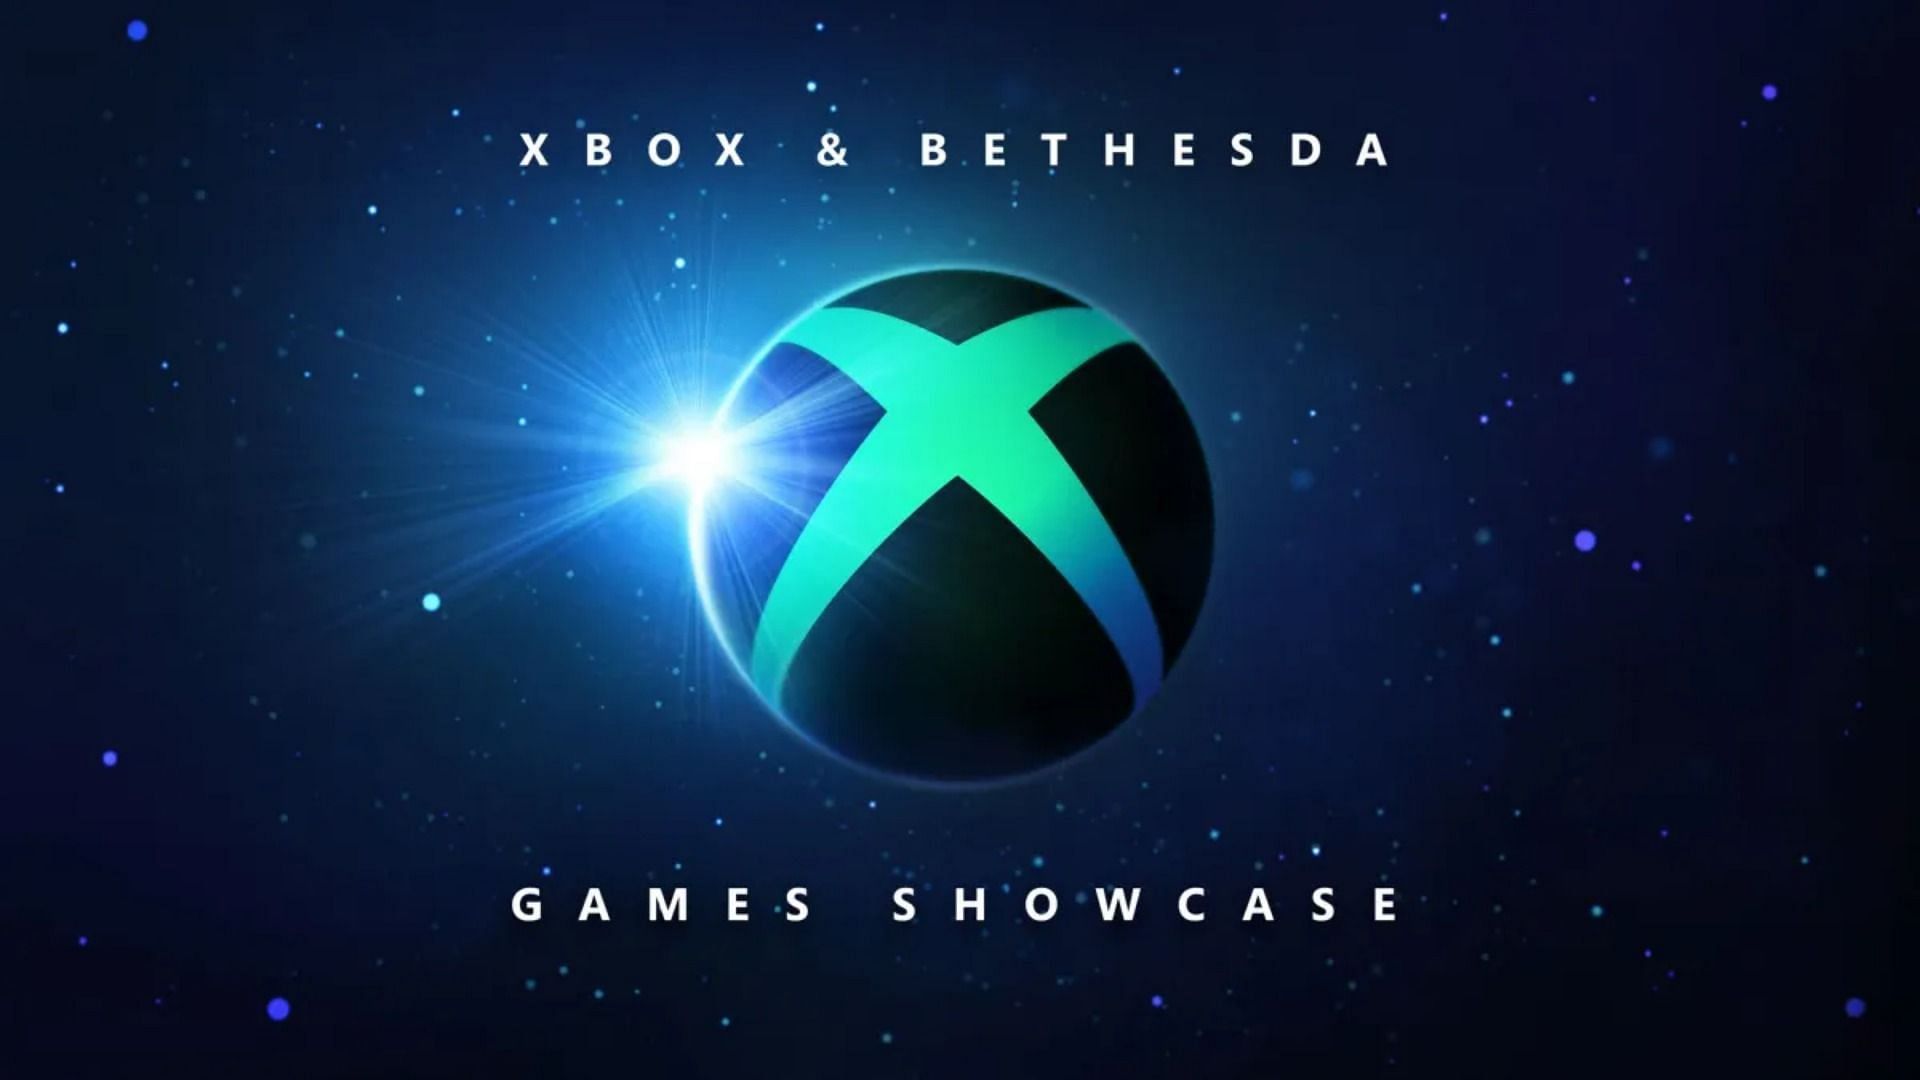 Xbox &amp; Bethesda Games Showcase (2022) set for June 12 (Image by Xbox)